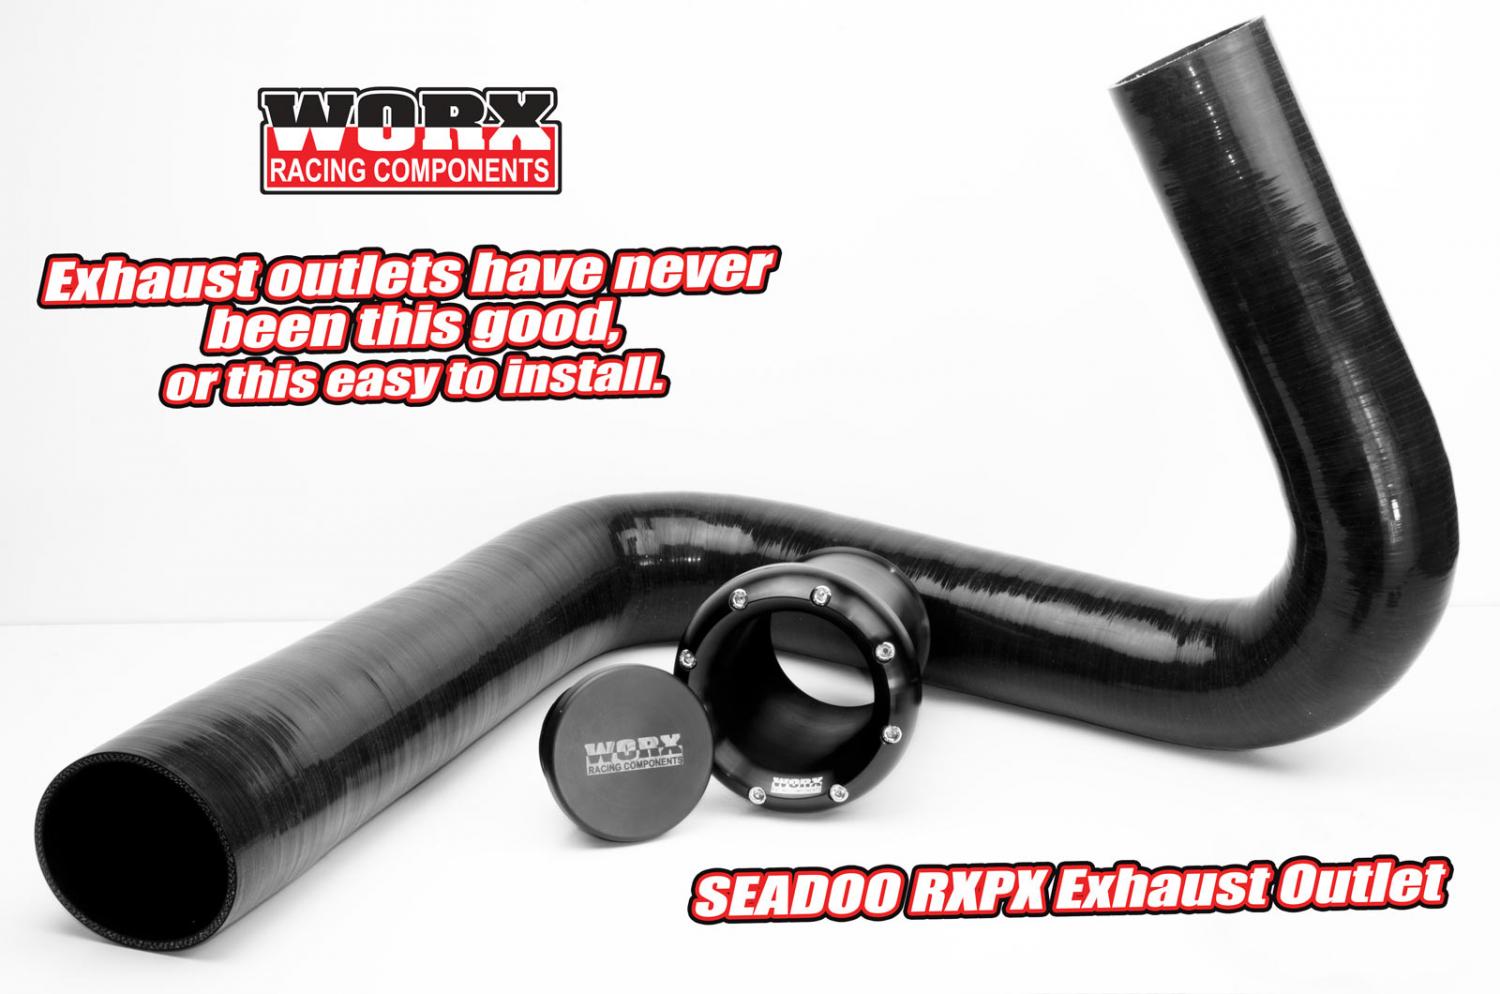 SEADOO 4 TEC EXHAUST OUTLET 274000901 2002-2004 GTX MODELS EXHAUST CURVED PIPE 